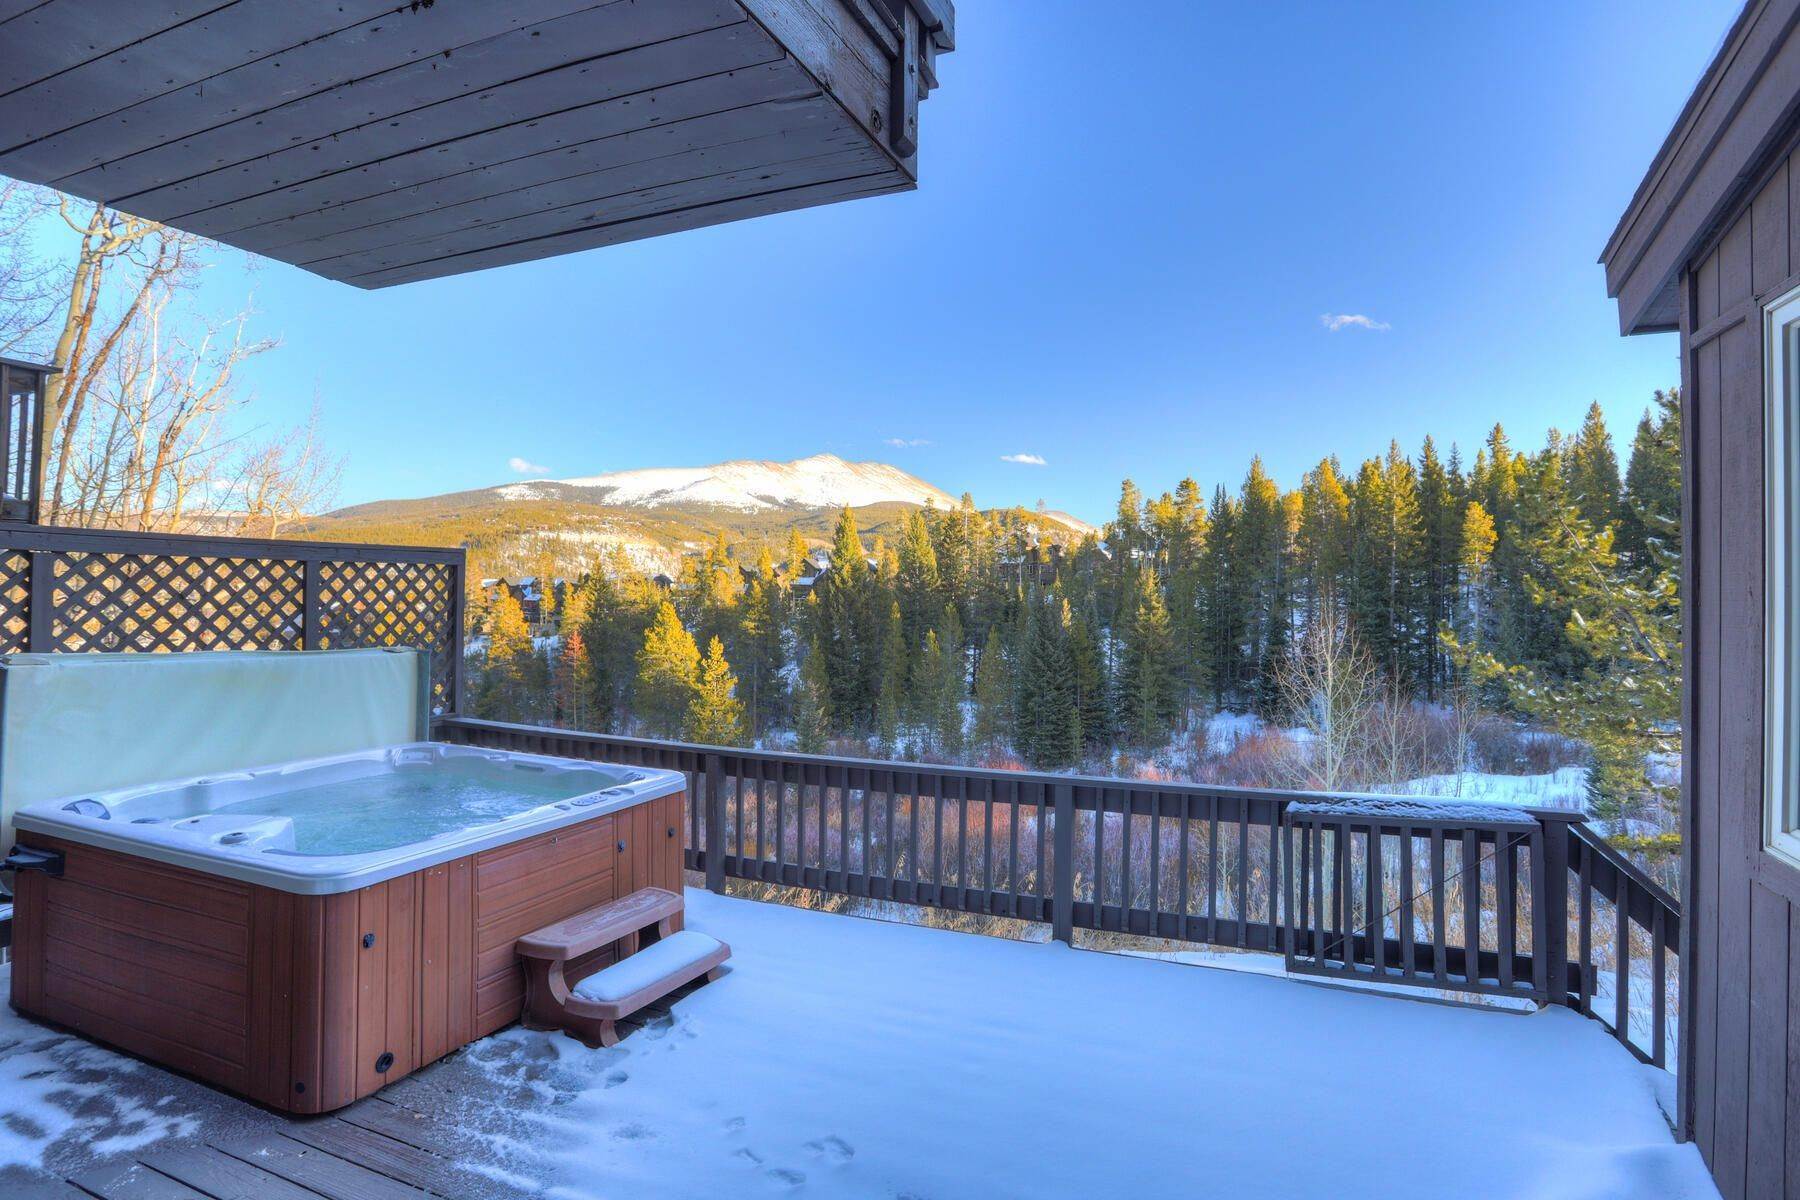 14. fractional ownership prop for Active at 965 4 O Clock Road, Breckenridge, CO 80424 965 4 O Clock Road Breckenridge, Colorado 80424 United States